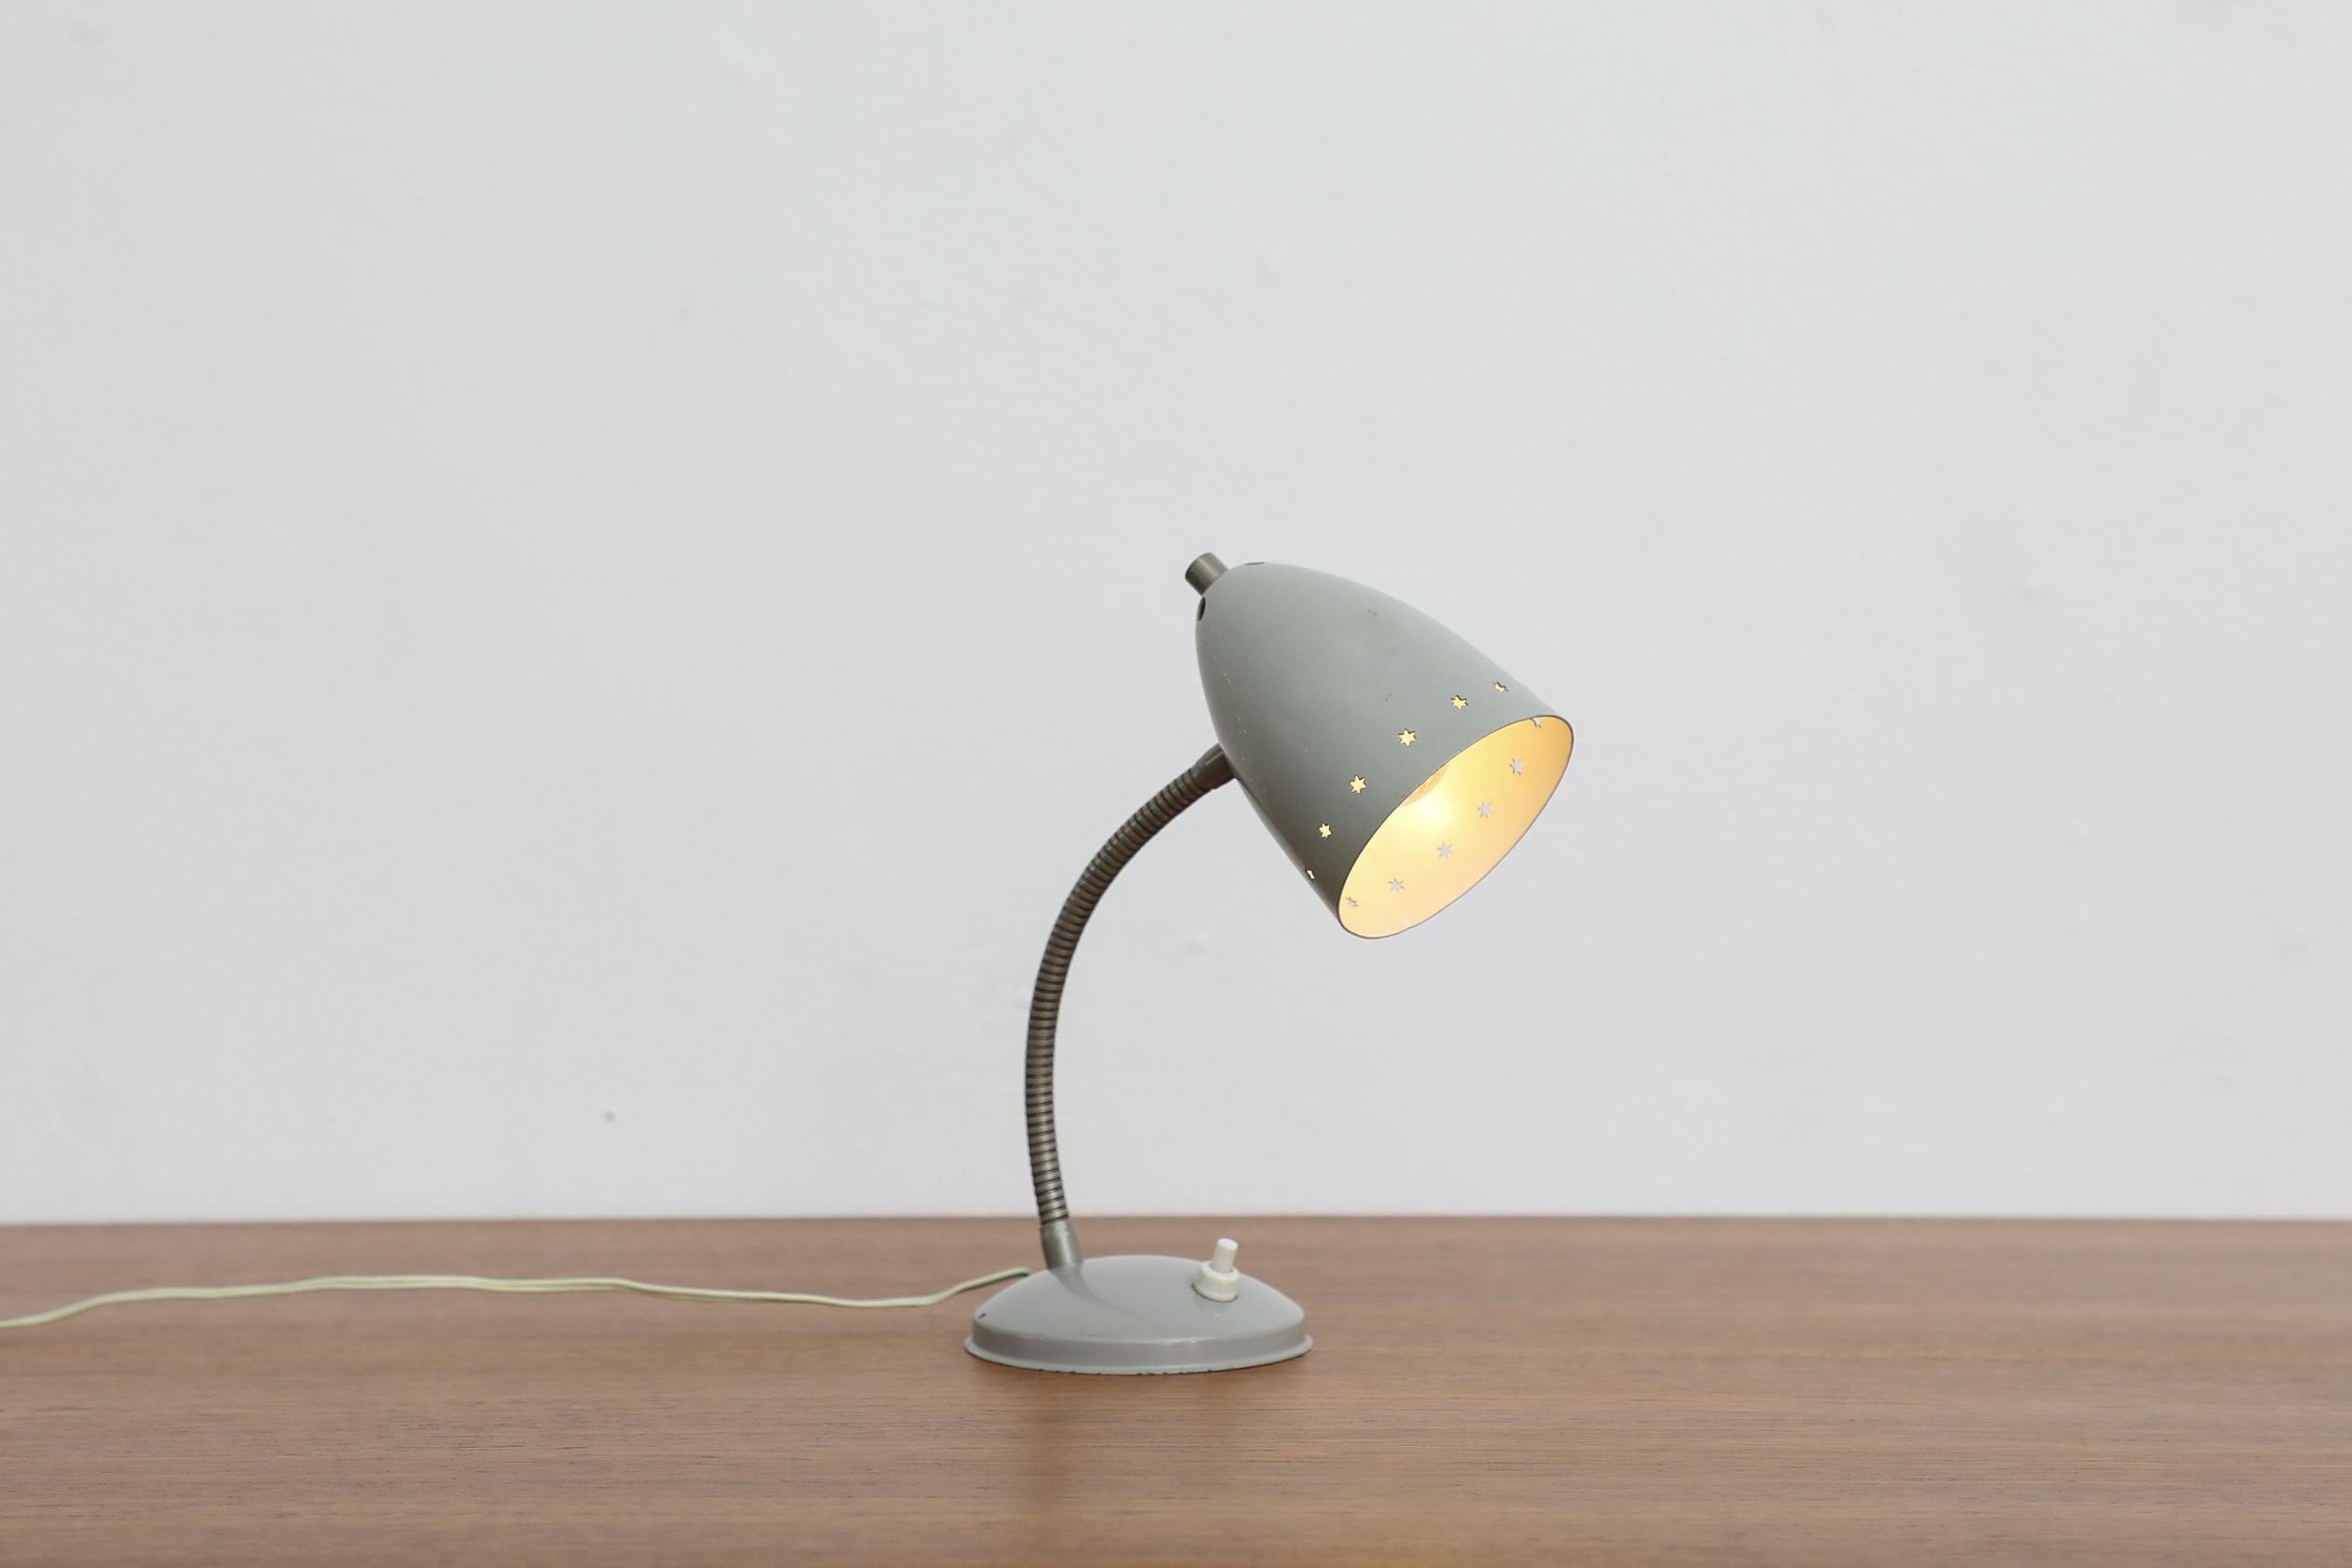 Enameled Little Grey Mid-Century Hala Zeist Reading Lamp with Star Cut-outs on Shade For Sale